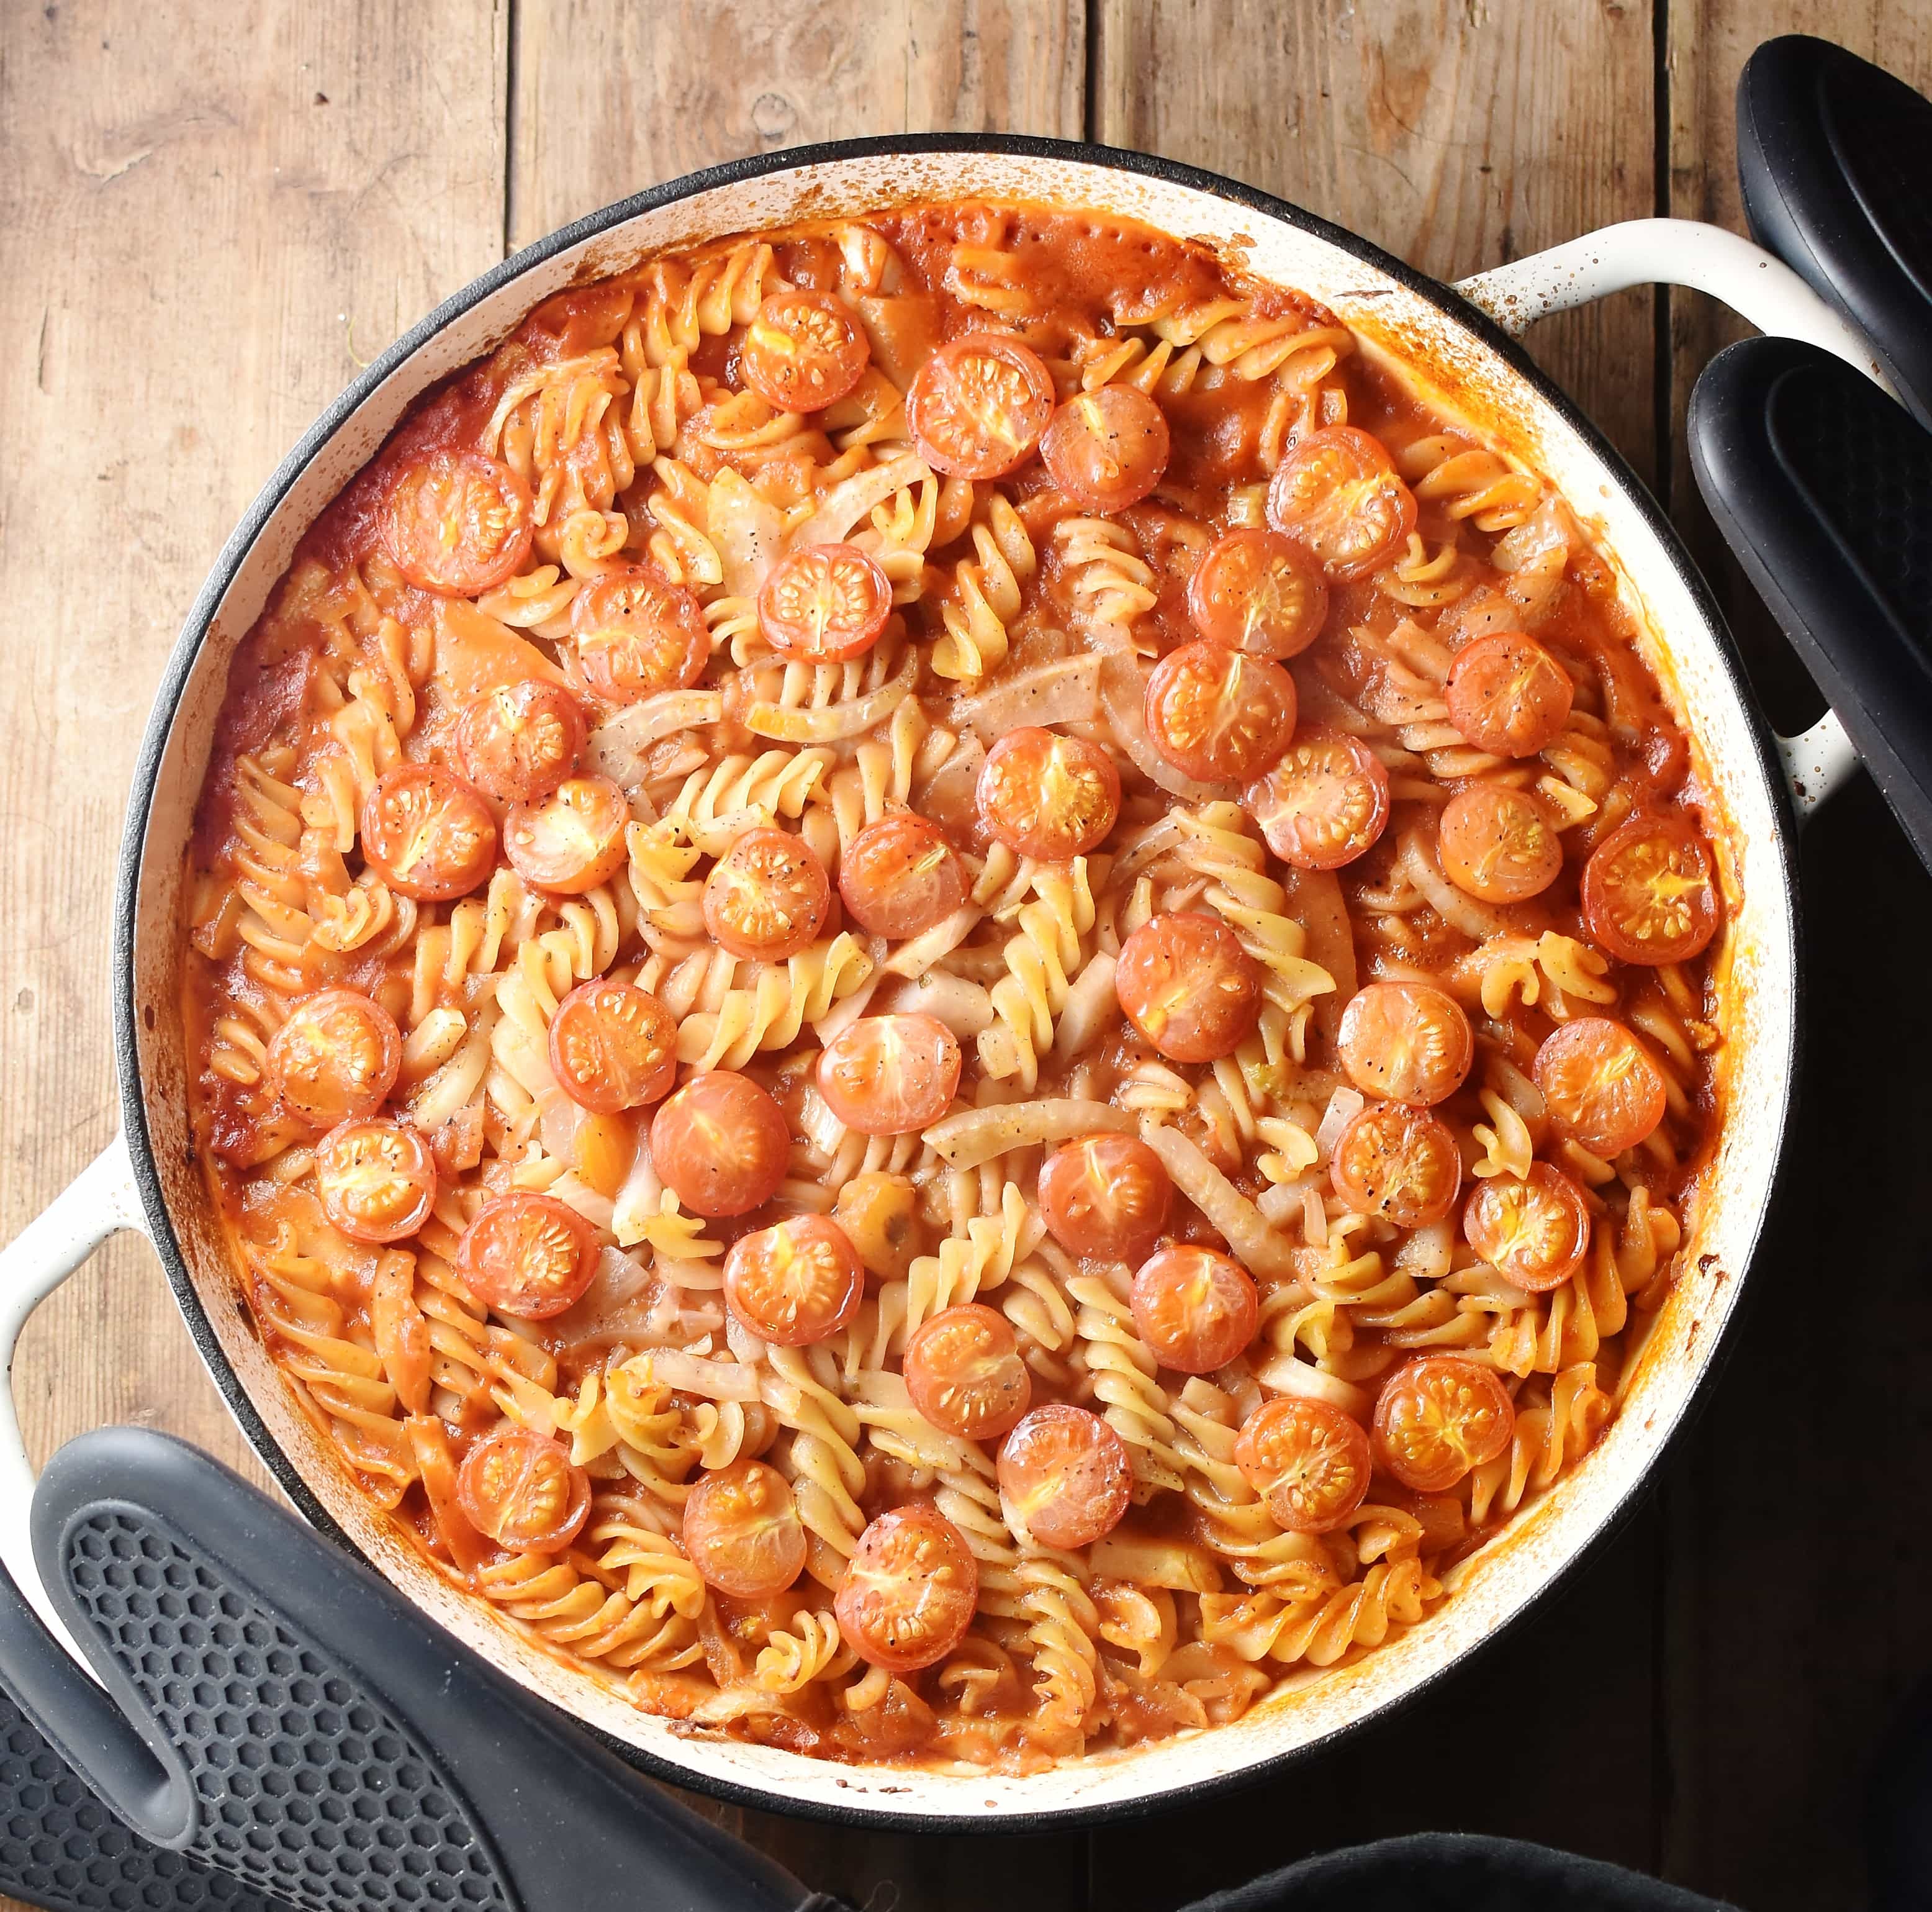 Baked tomato fennel pasta in large white casserole dish with black rubber gloves around handles.